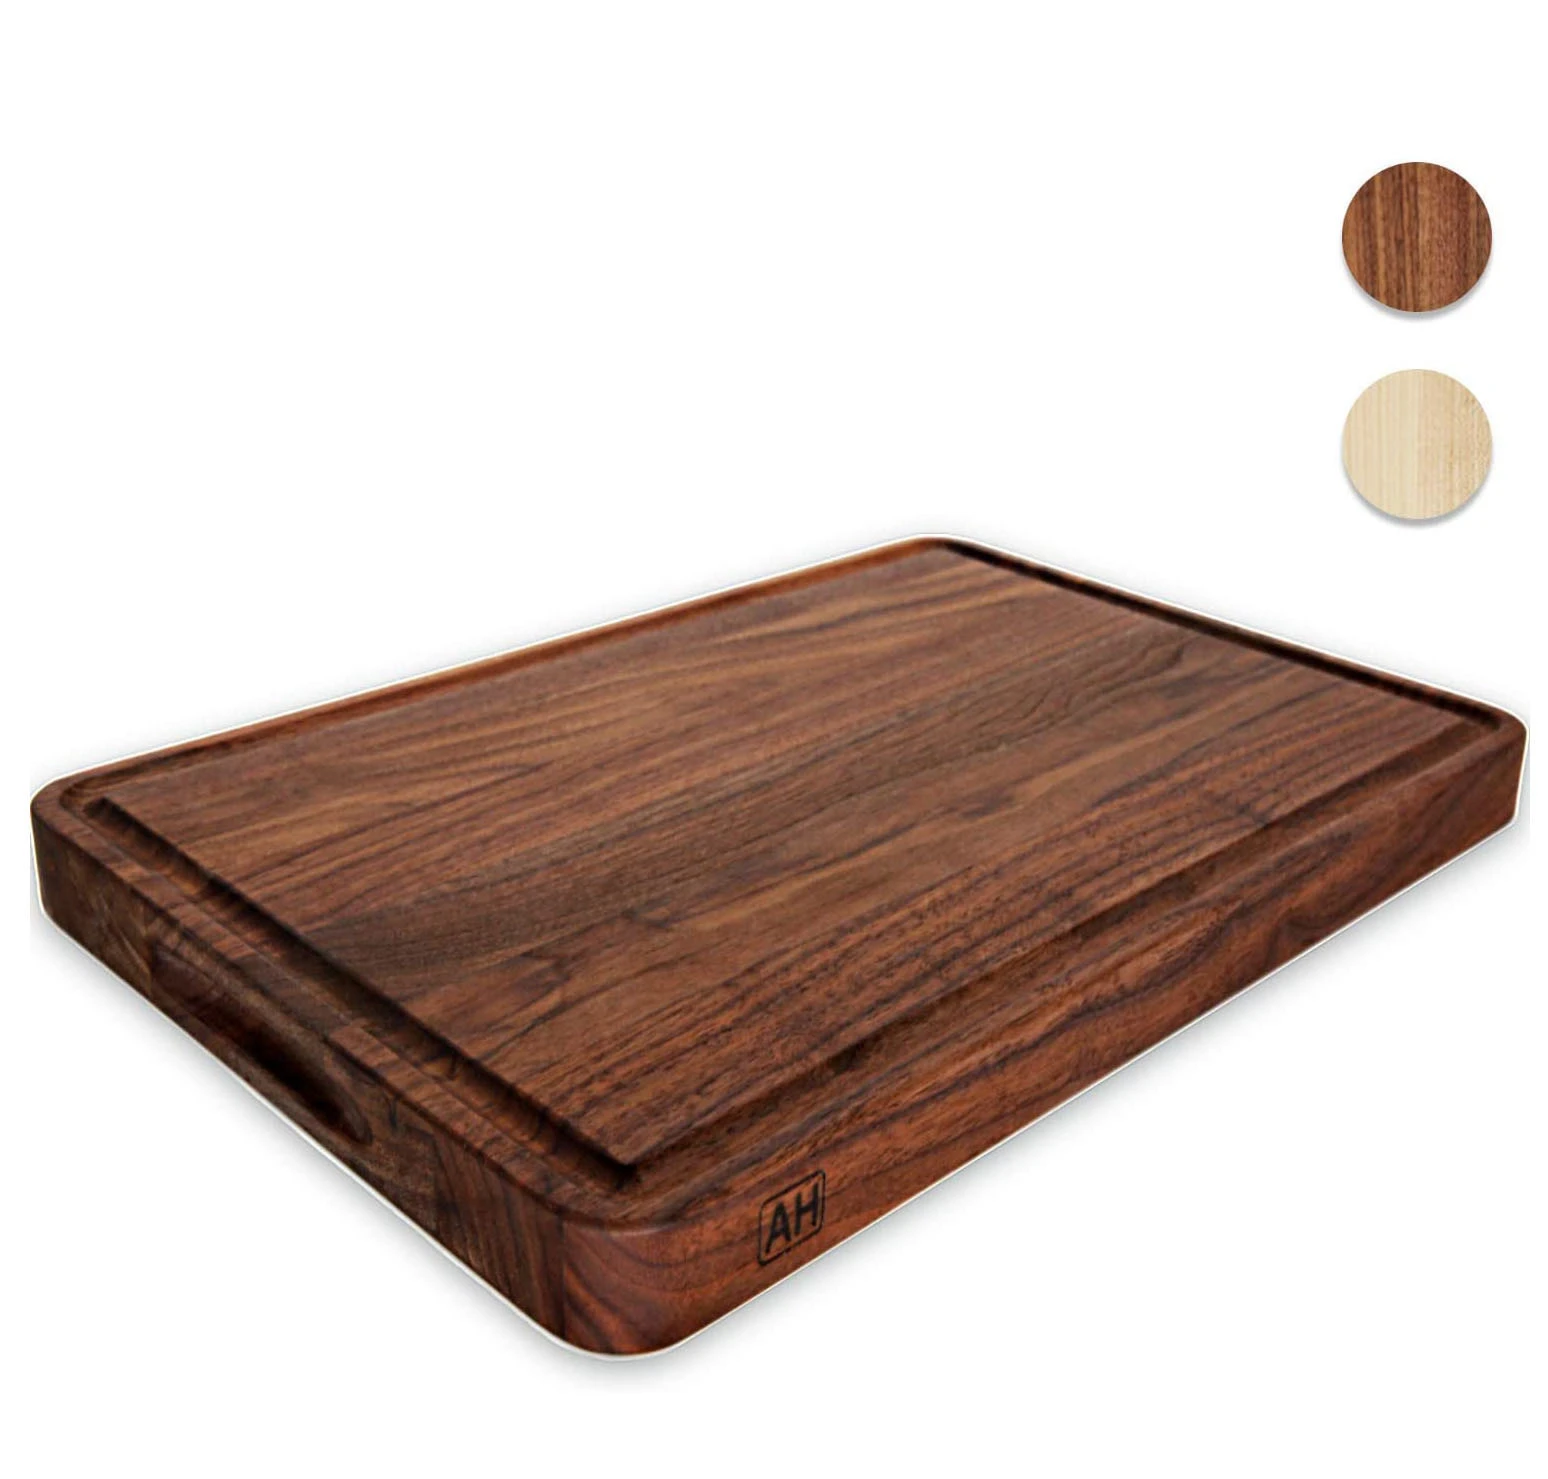 Walnut Wood Cutting Board Large Walnut 17x11 Inch Reversible with Handles and Juice Groove